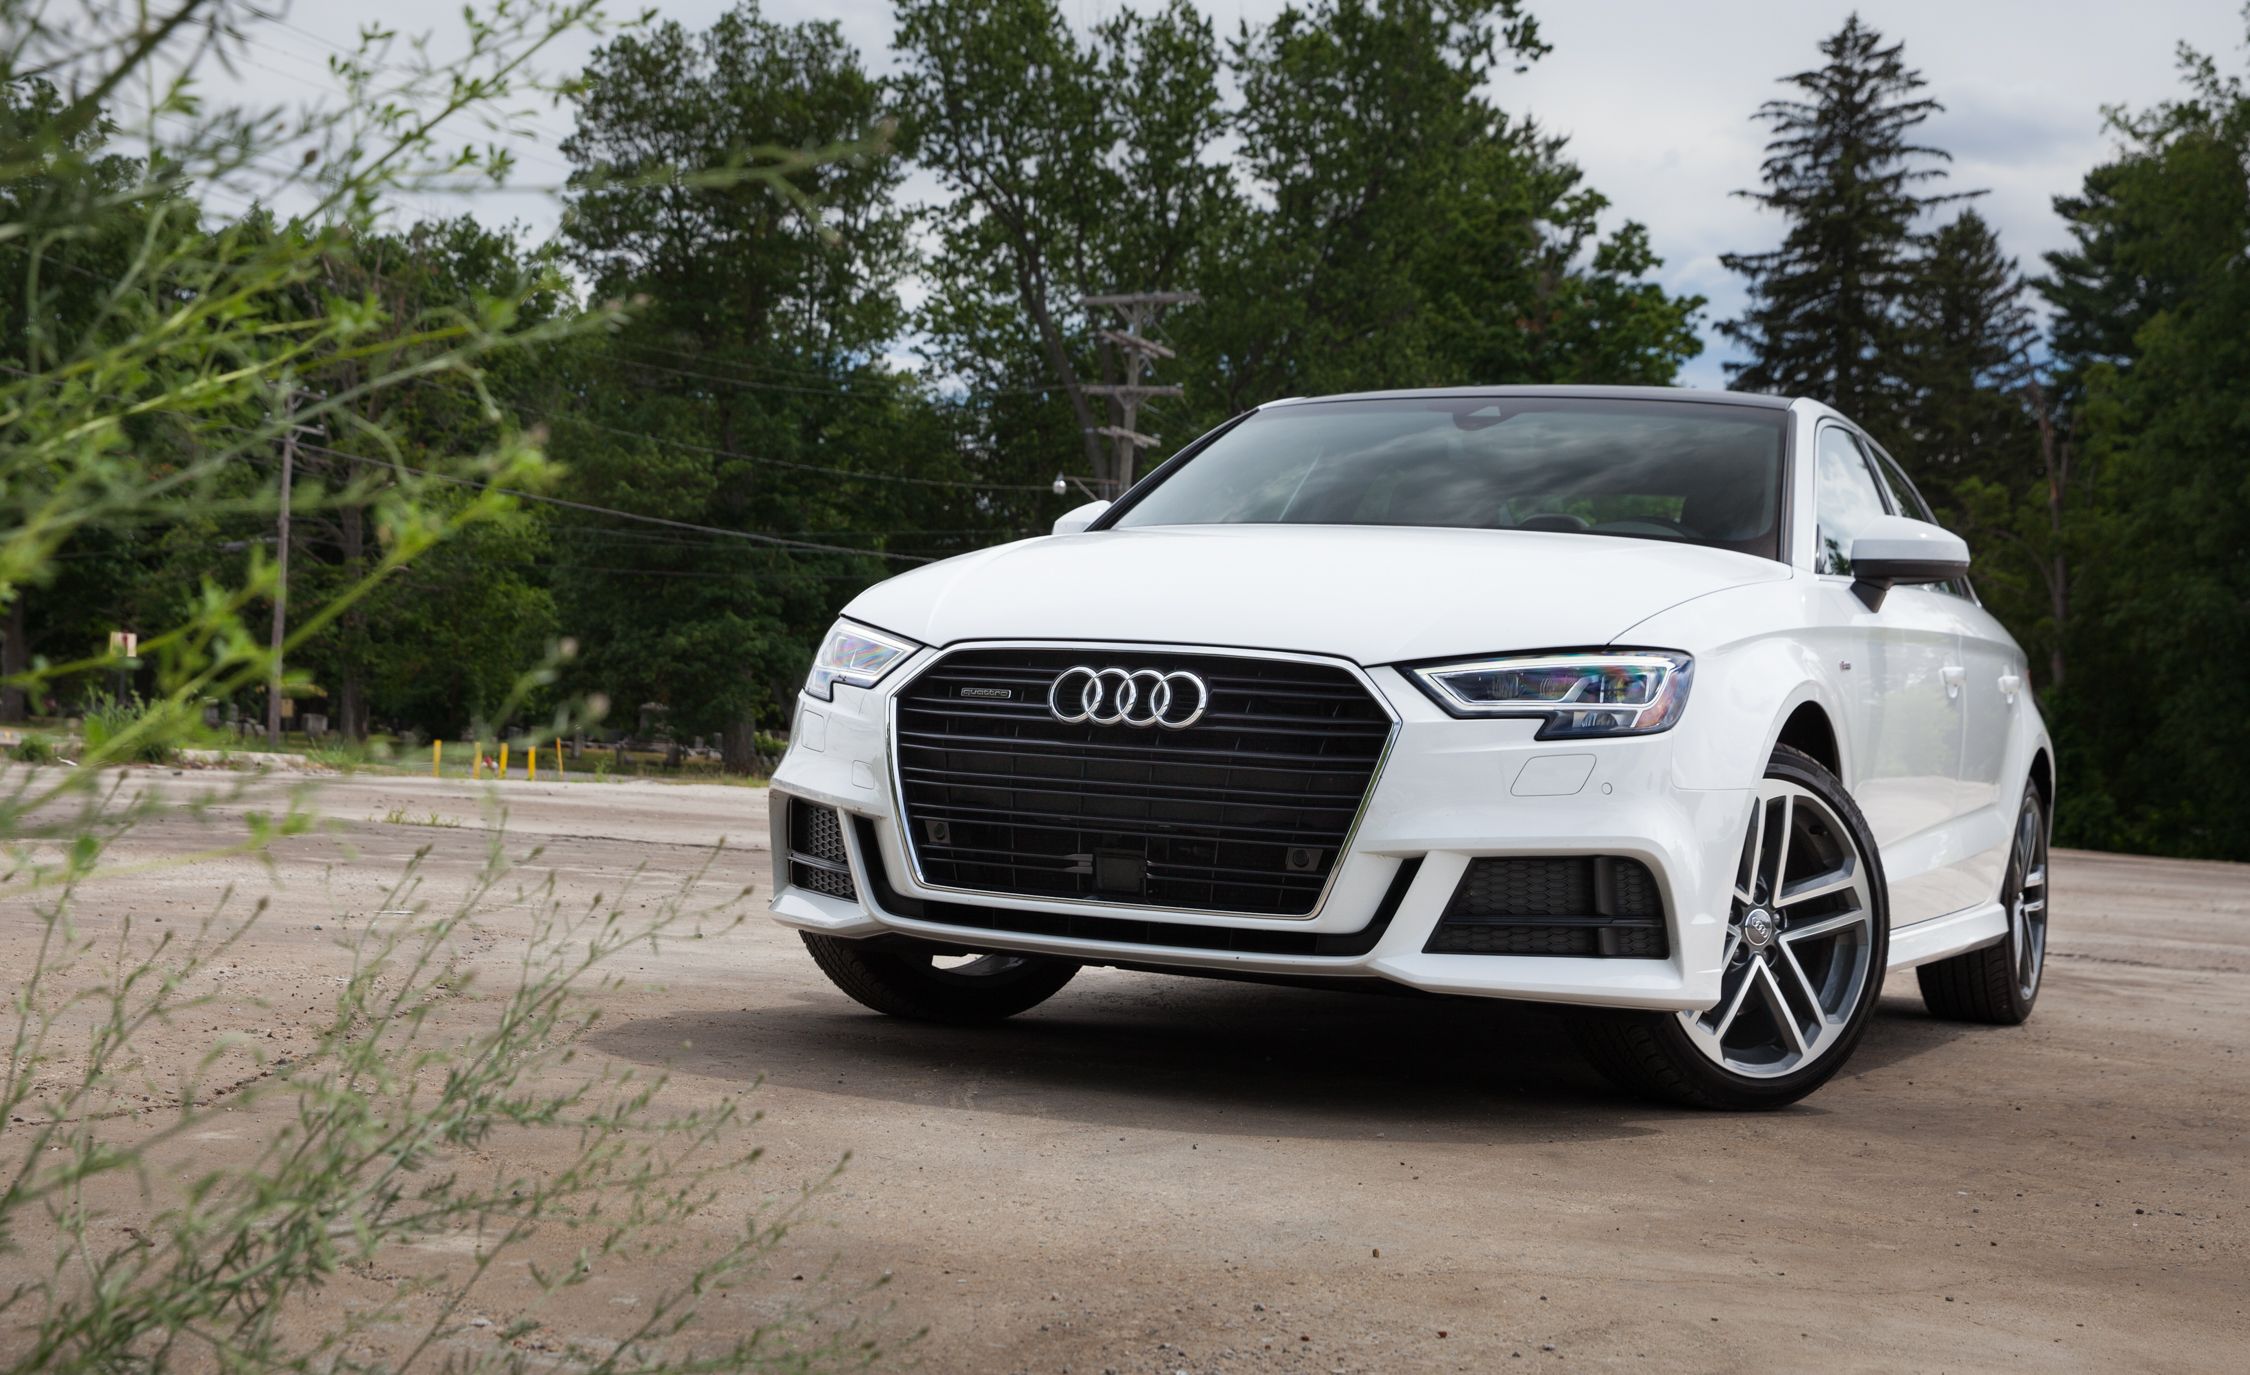 cilinder Ook Iedereen Tested: 2017 Audi A3 2.0T Quattro